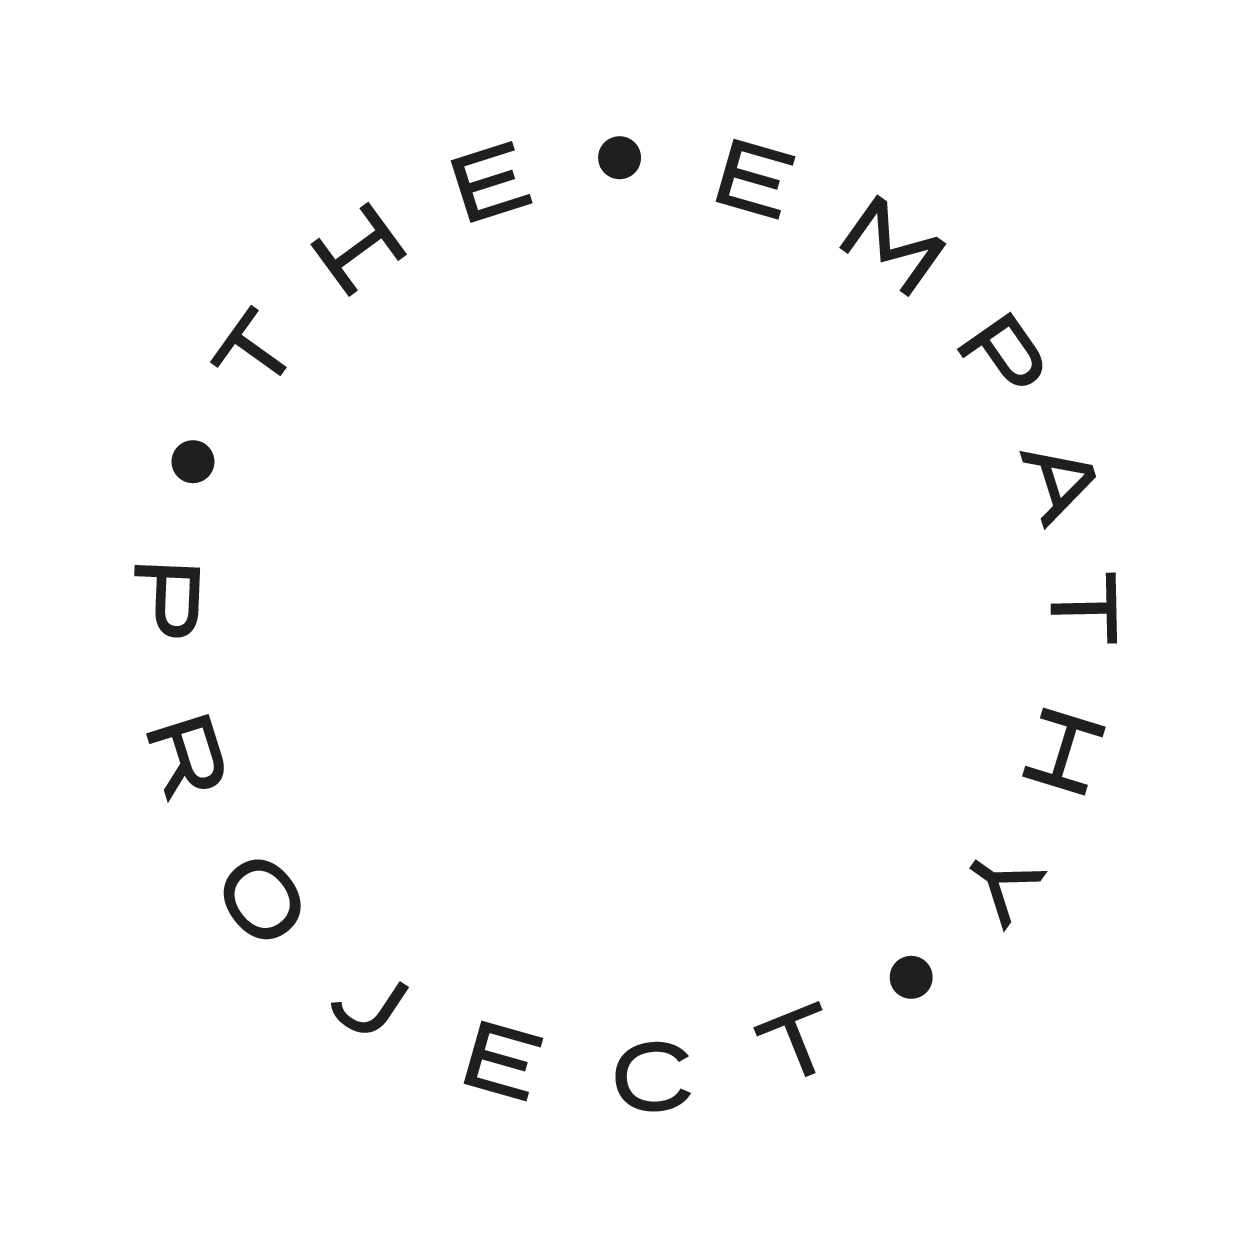 The Empathy Project